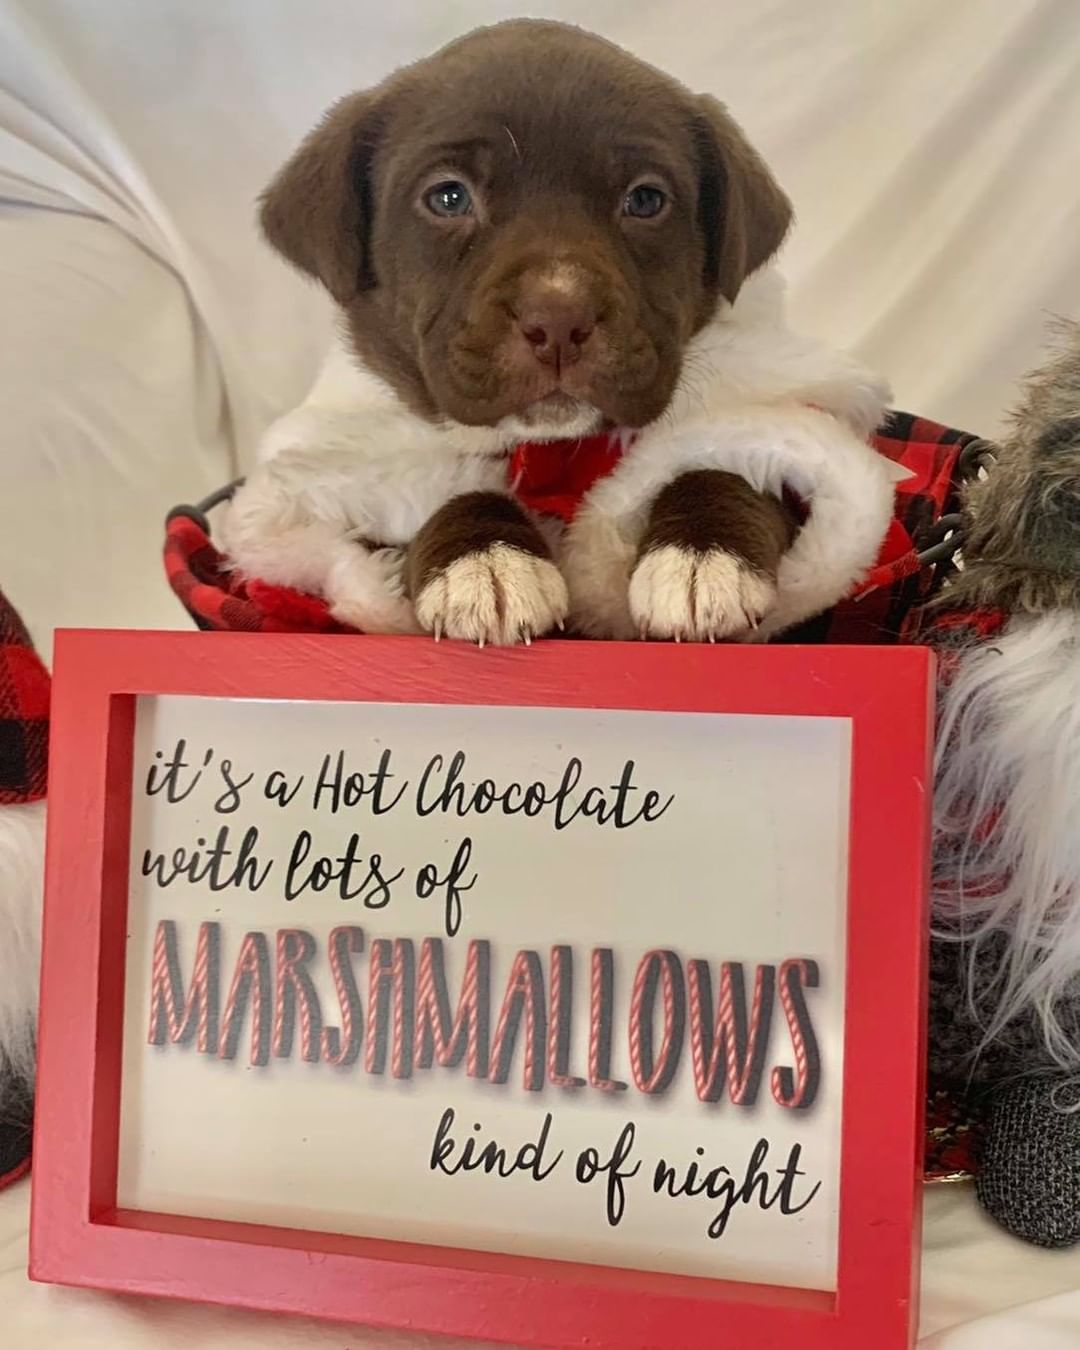 Are our fosters good sports or what 🥰 from a last minute “would you be mad if I was headed your way with 7 puppies” phone call, all the way to the themed photo shoot for their introduction ❤️ 

Here are our “freeze warning pups”! The cold weather brought with it the thoughts of hot cocoa and the upcoming holiday season. So, meet Tinsel, Noel, Holly, Jingle, Nick, Mistletoe and Joy ❣️ These adorable, super cuddly lab mixes will be ready to accept applications around the first week in December, so keep your eyes on the website! And please share this post! Our adoptions have slowed drastically due to Facebook algorithms limiting our pages views 😞 these guys would love to spend the holidays in their forever homes 🏡

Www.releashatlanta.com